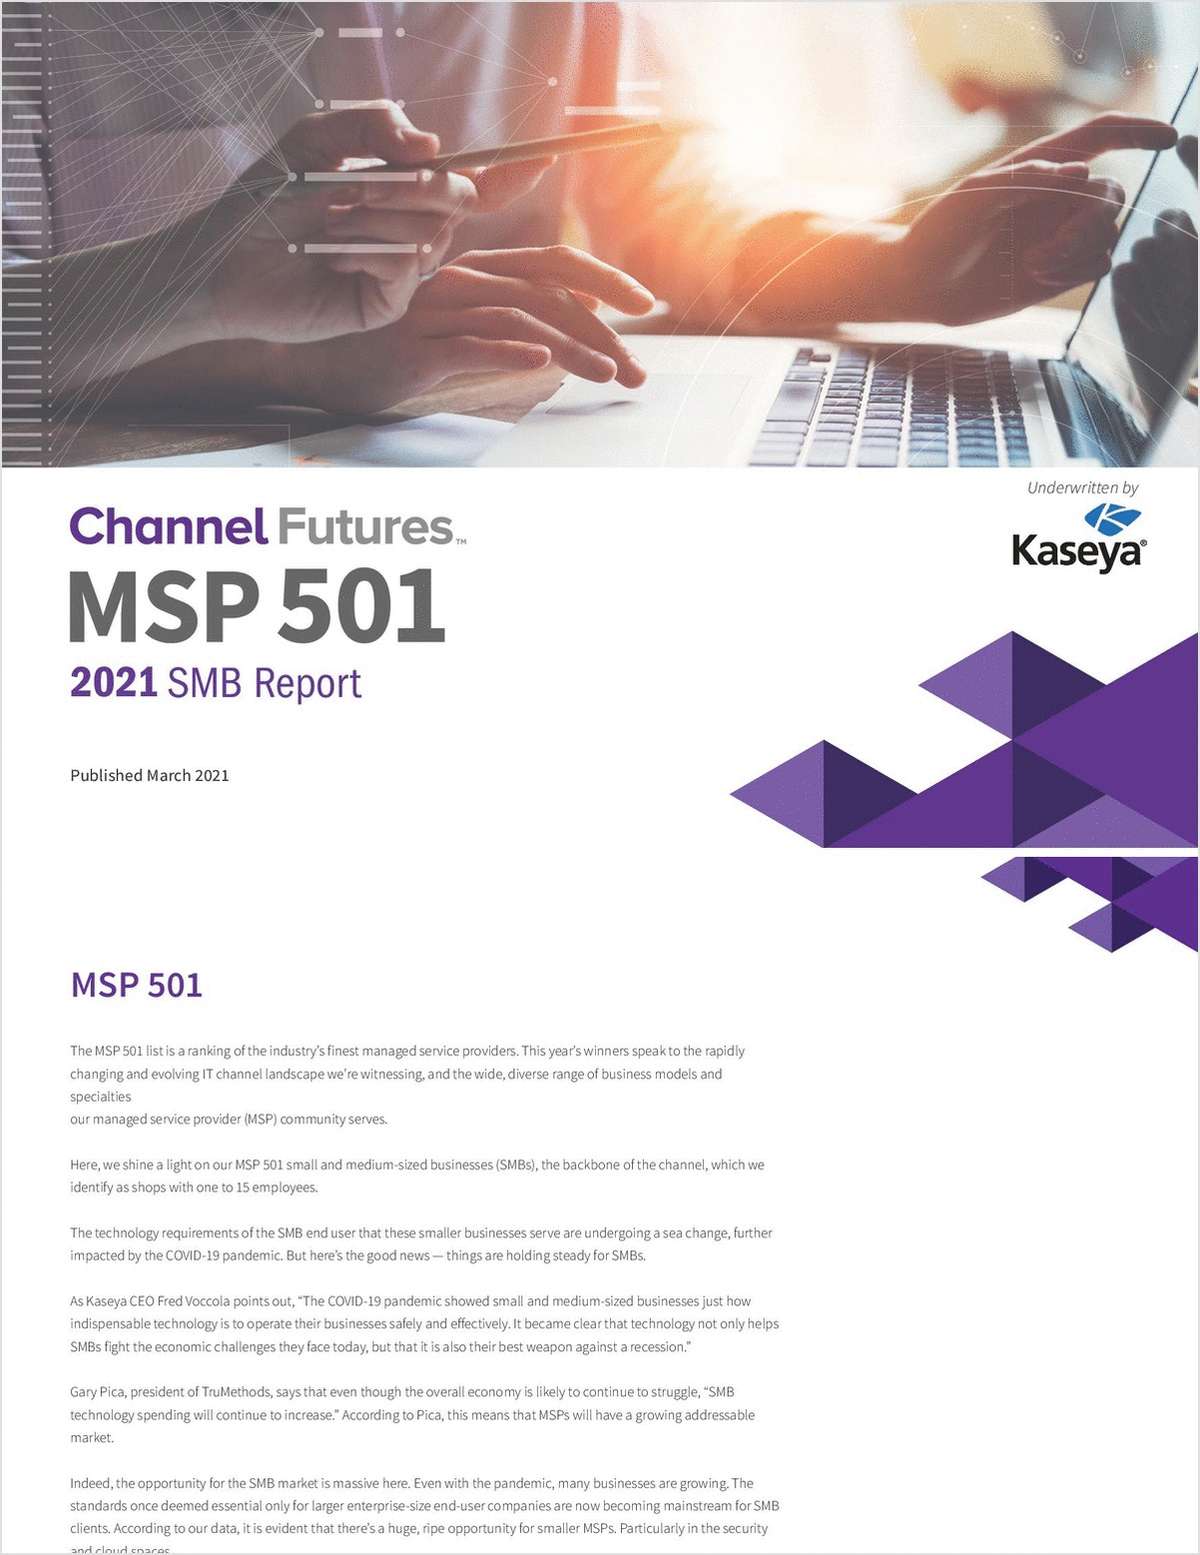 Opportunities Ripe for Smaller MSPs: MSP 501 SMB Report